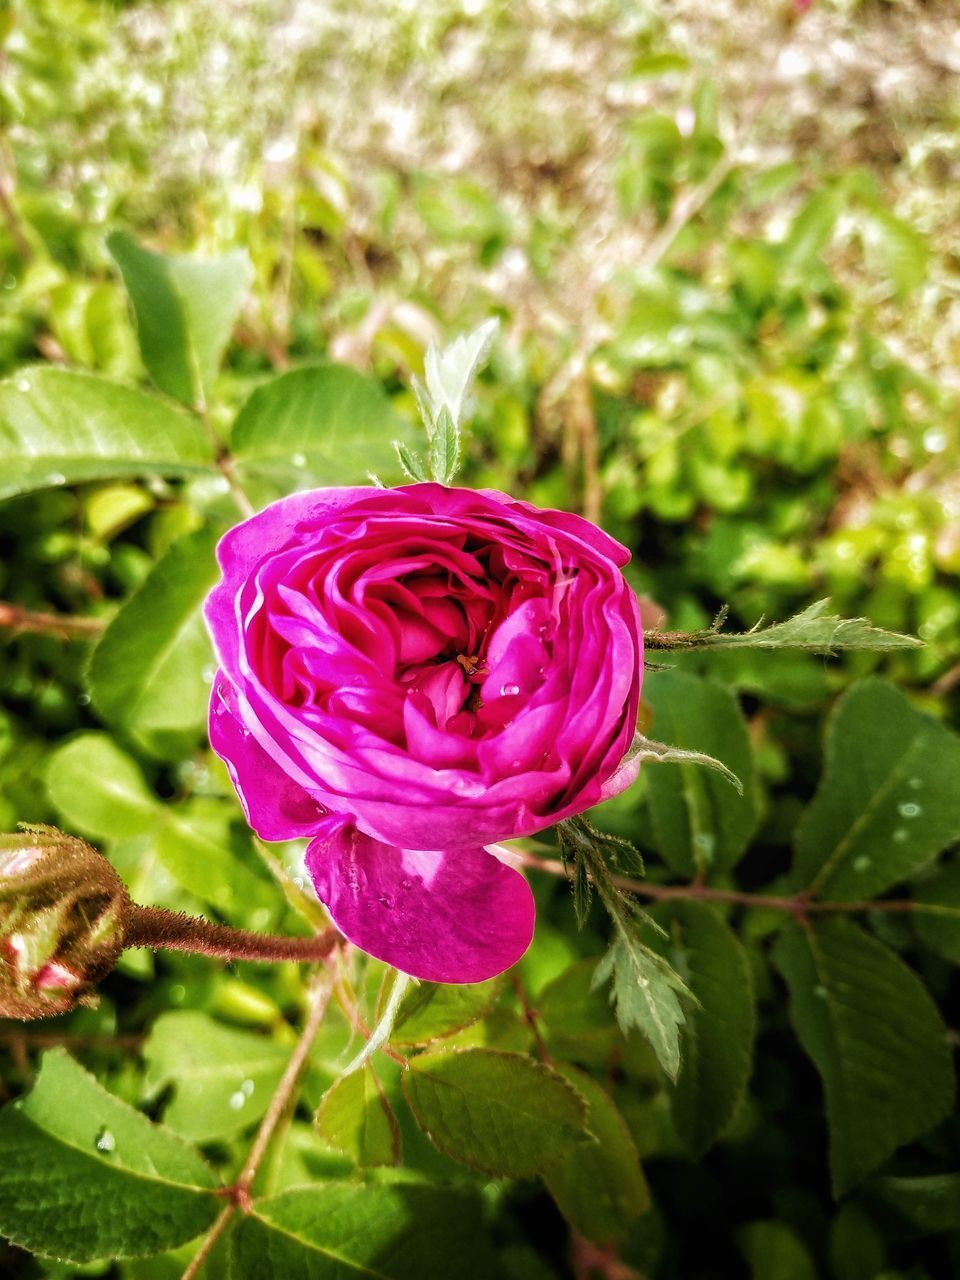 CLOSE-UP OF PINK ROSE IN PURPLE FLOWER